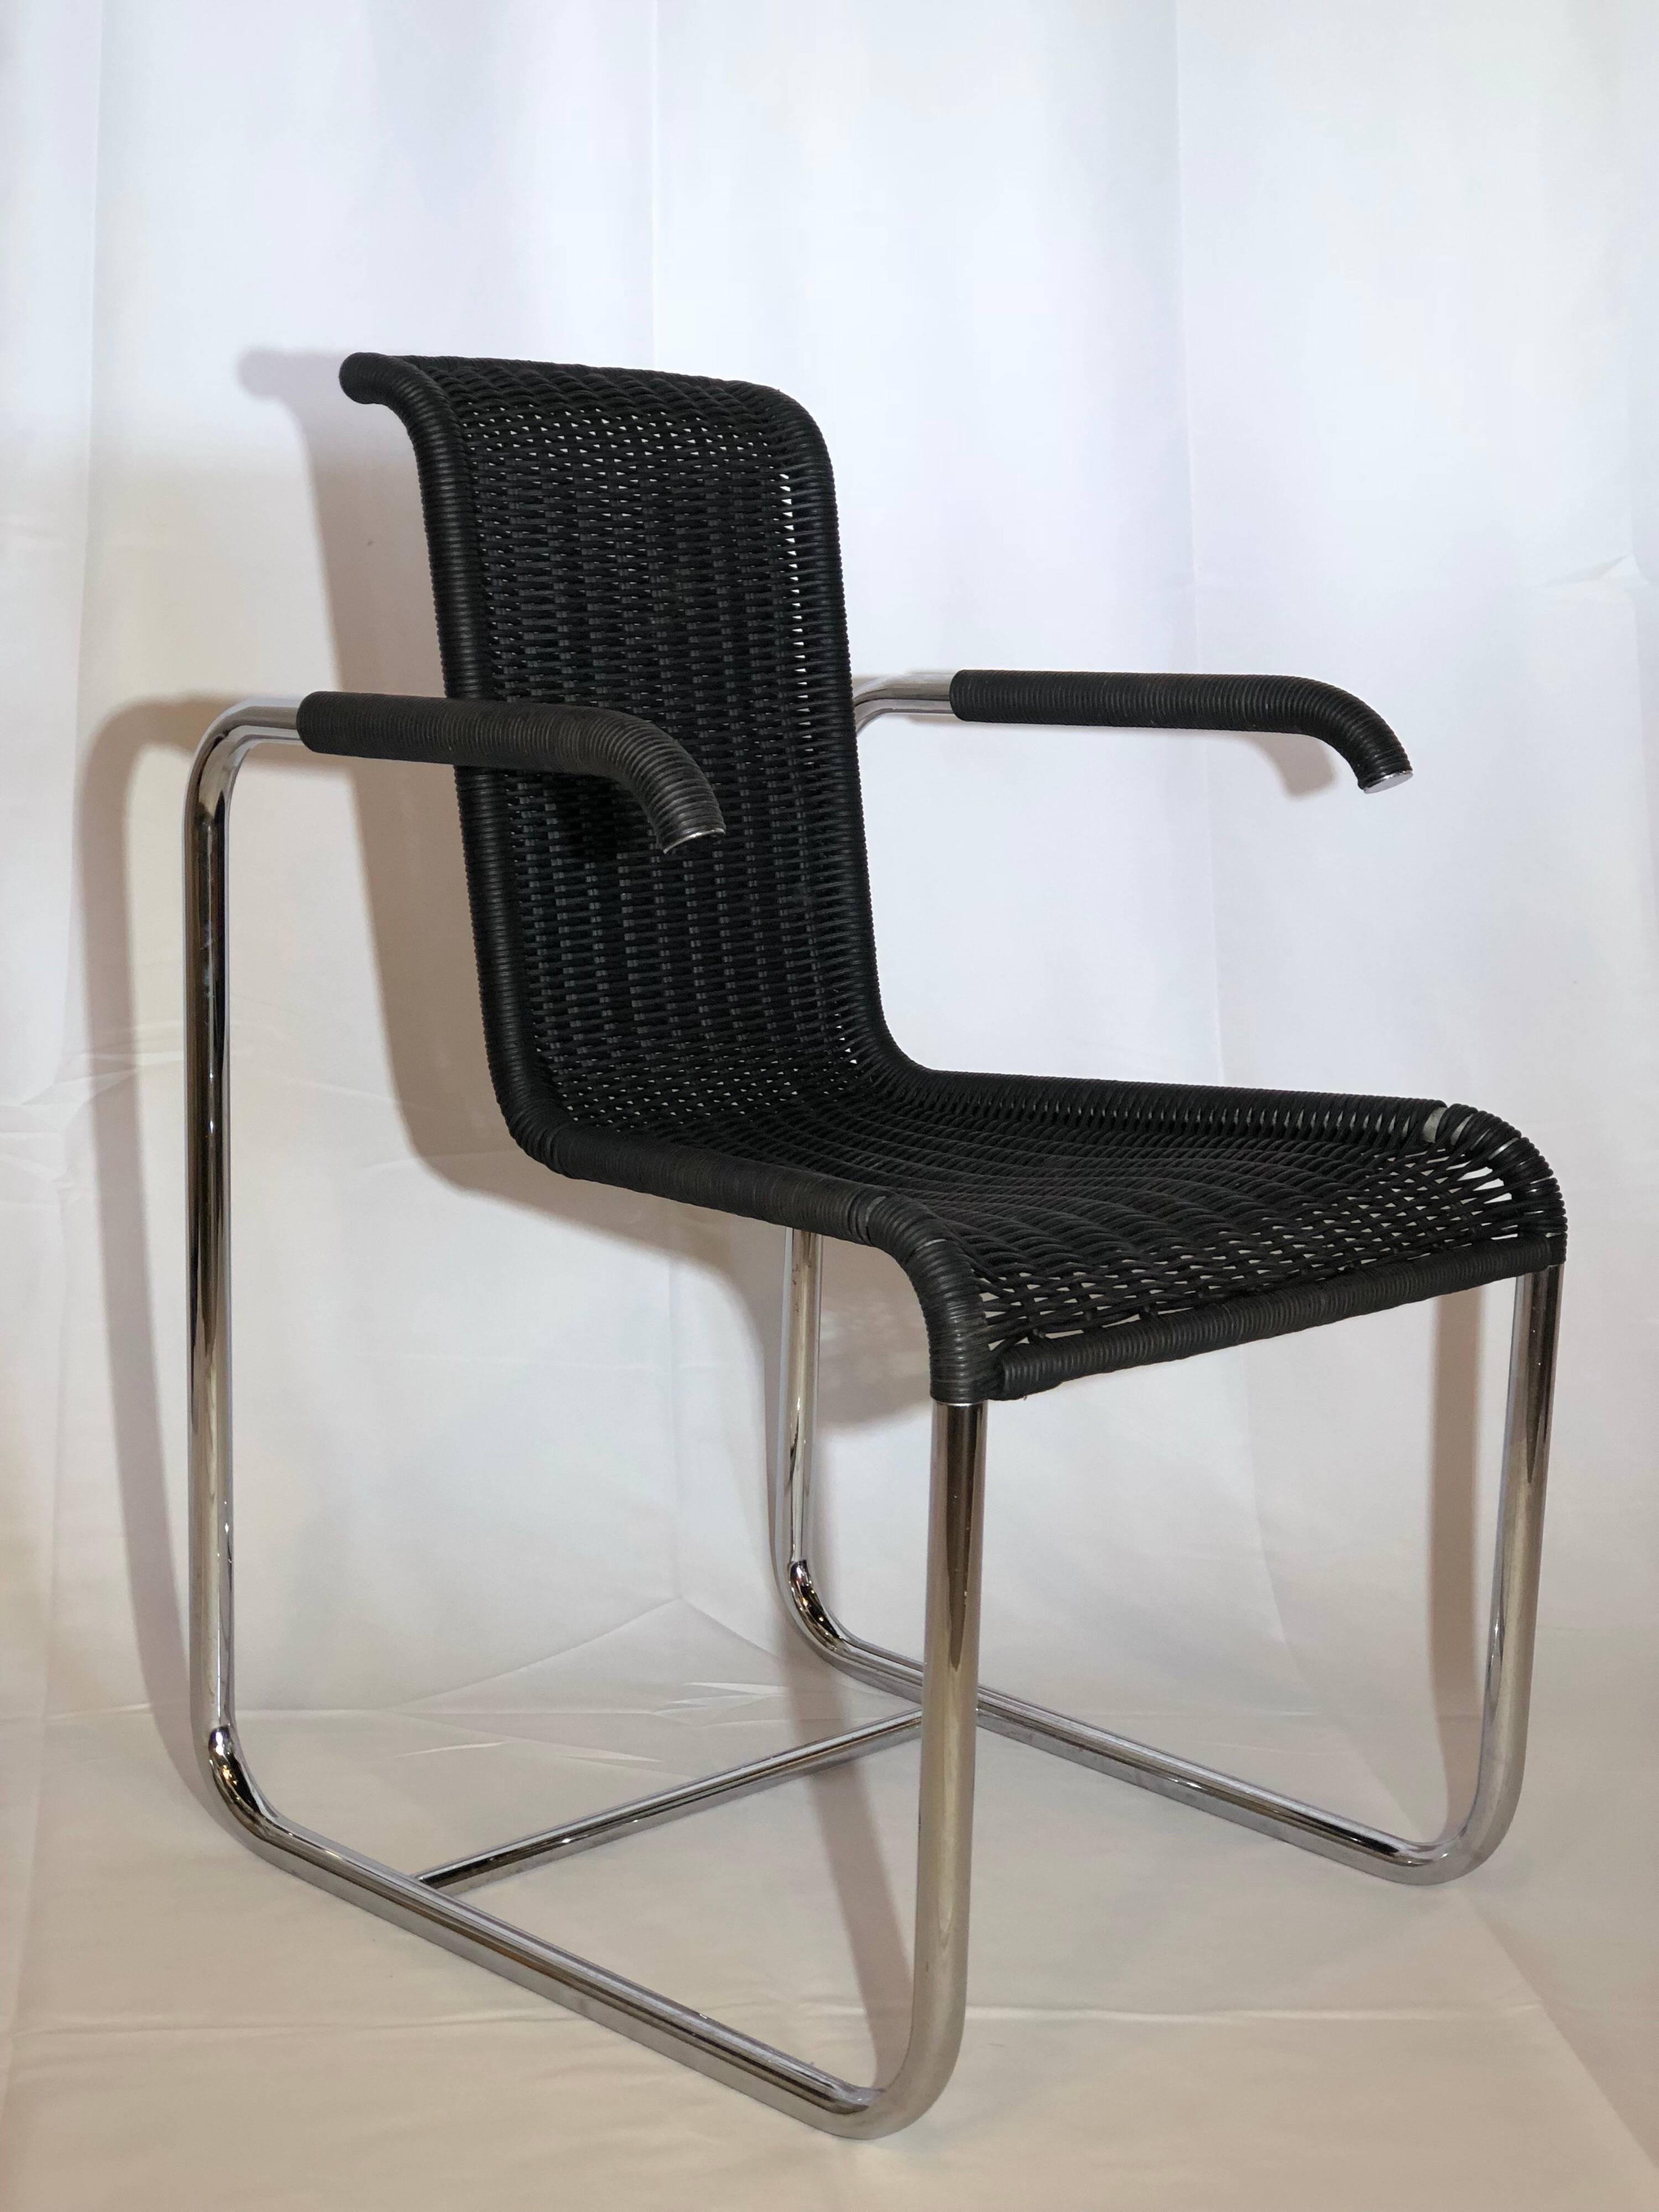 Jean Prouvé D20 Stainless Steel Leather Wicker Chairs for Tecta, Germany, 1980s For Sale 4